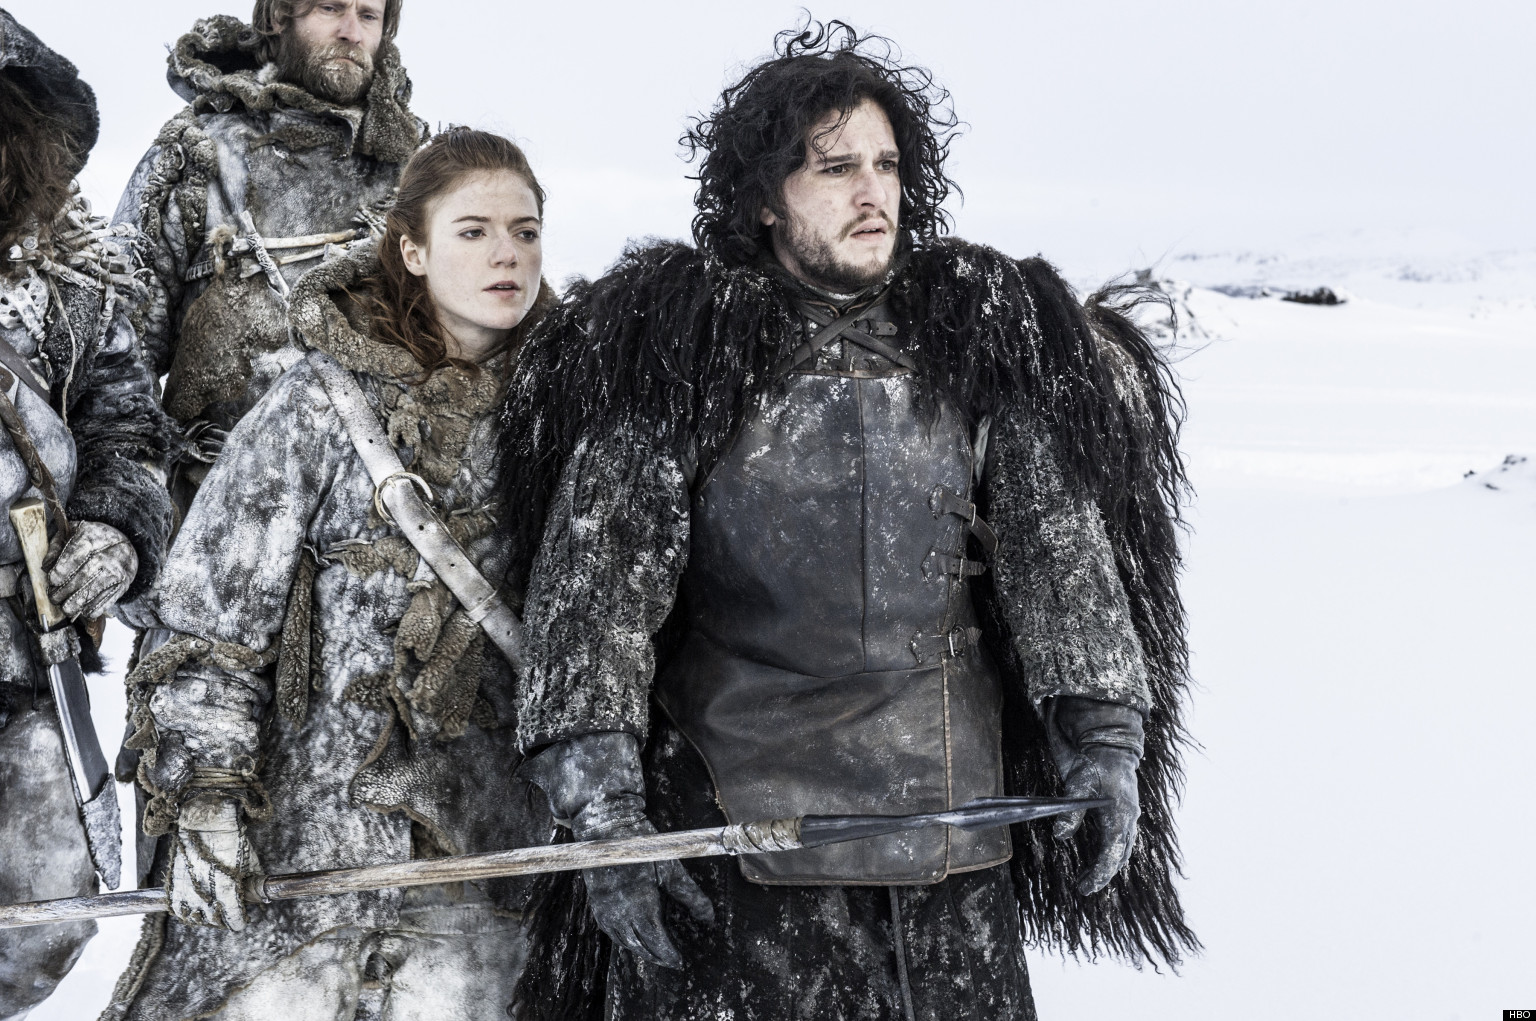 Behind Jon Snow And Ygritte S Game Of Thrones Steamy